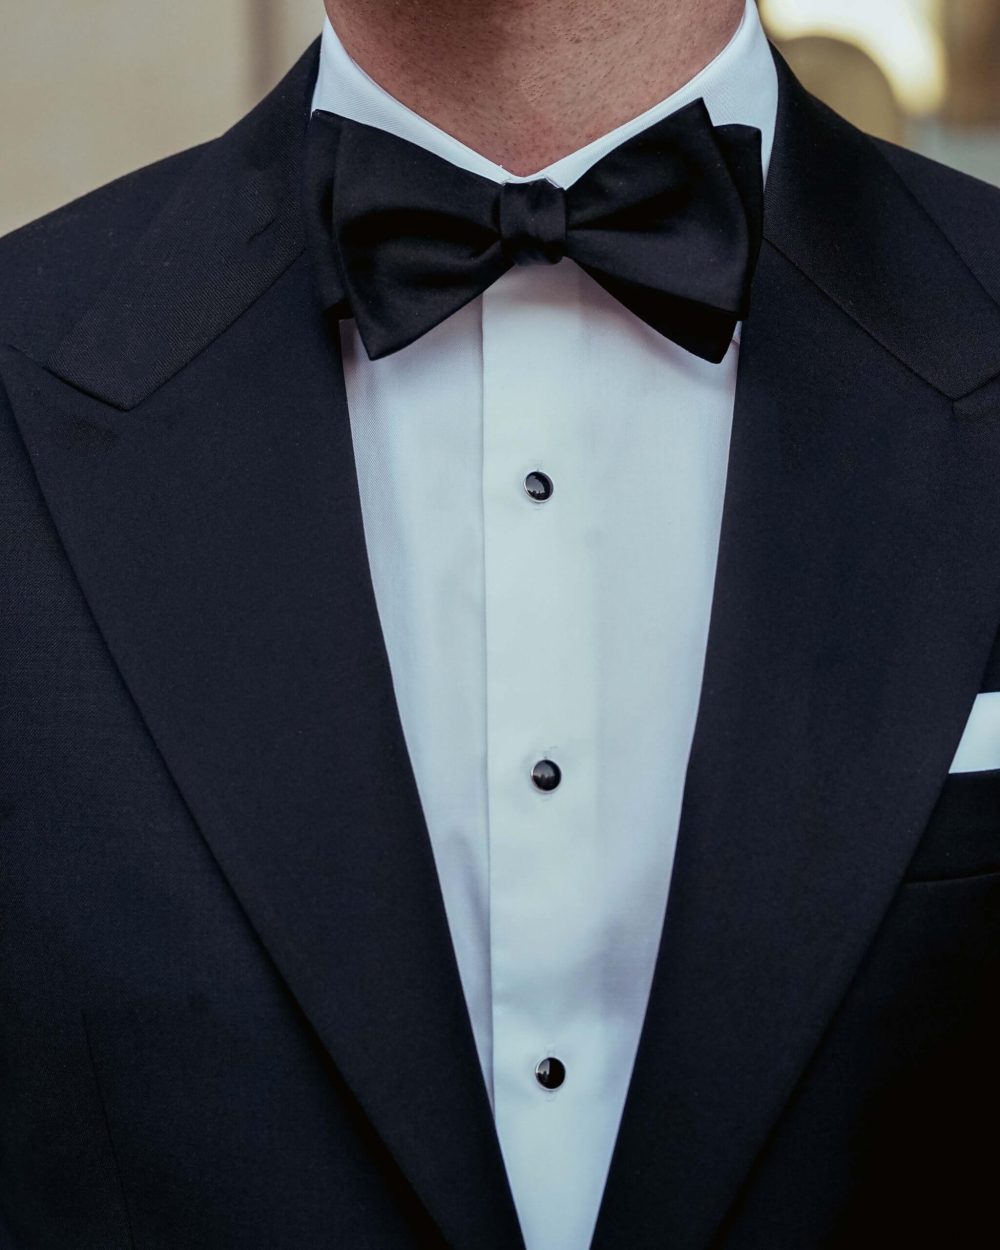 Black-tie Dress Code Explained - Mond - All about the Smoking